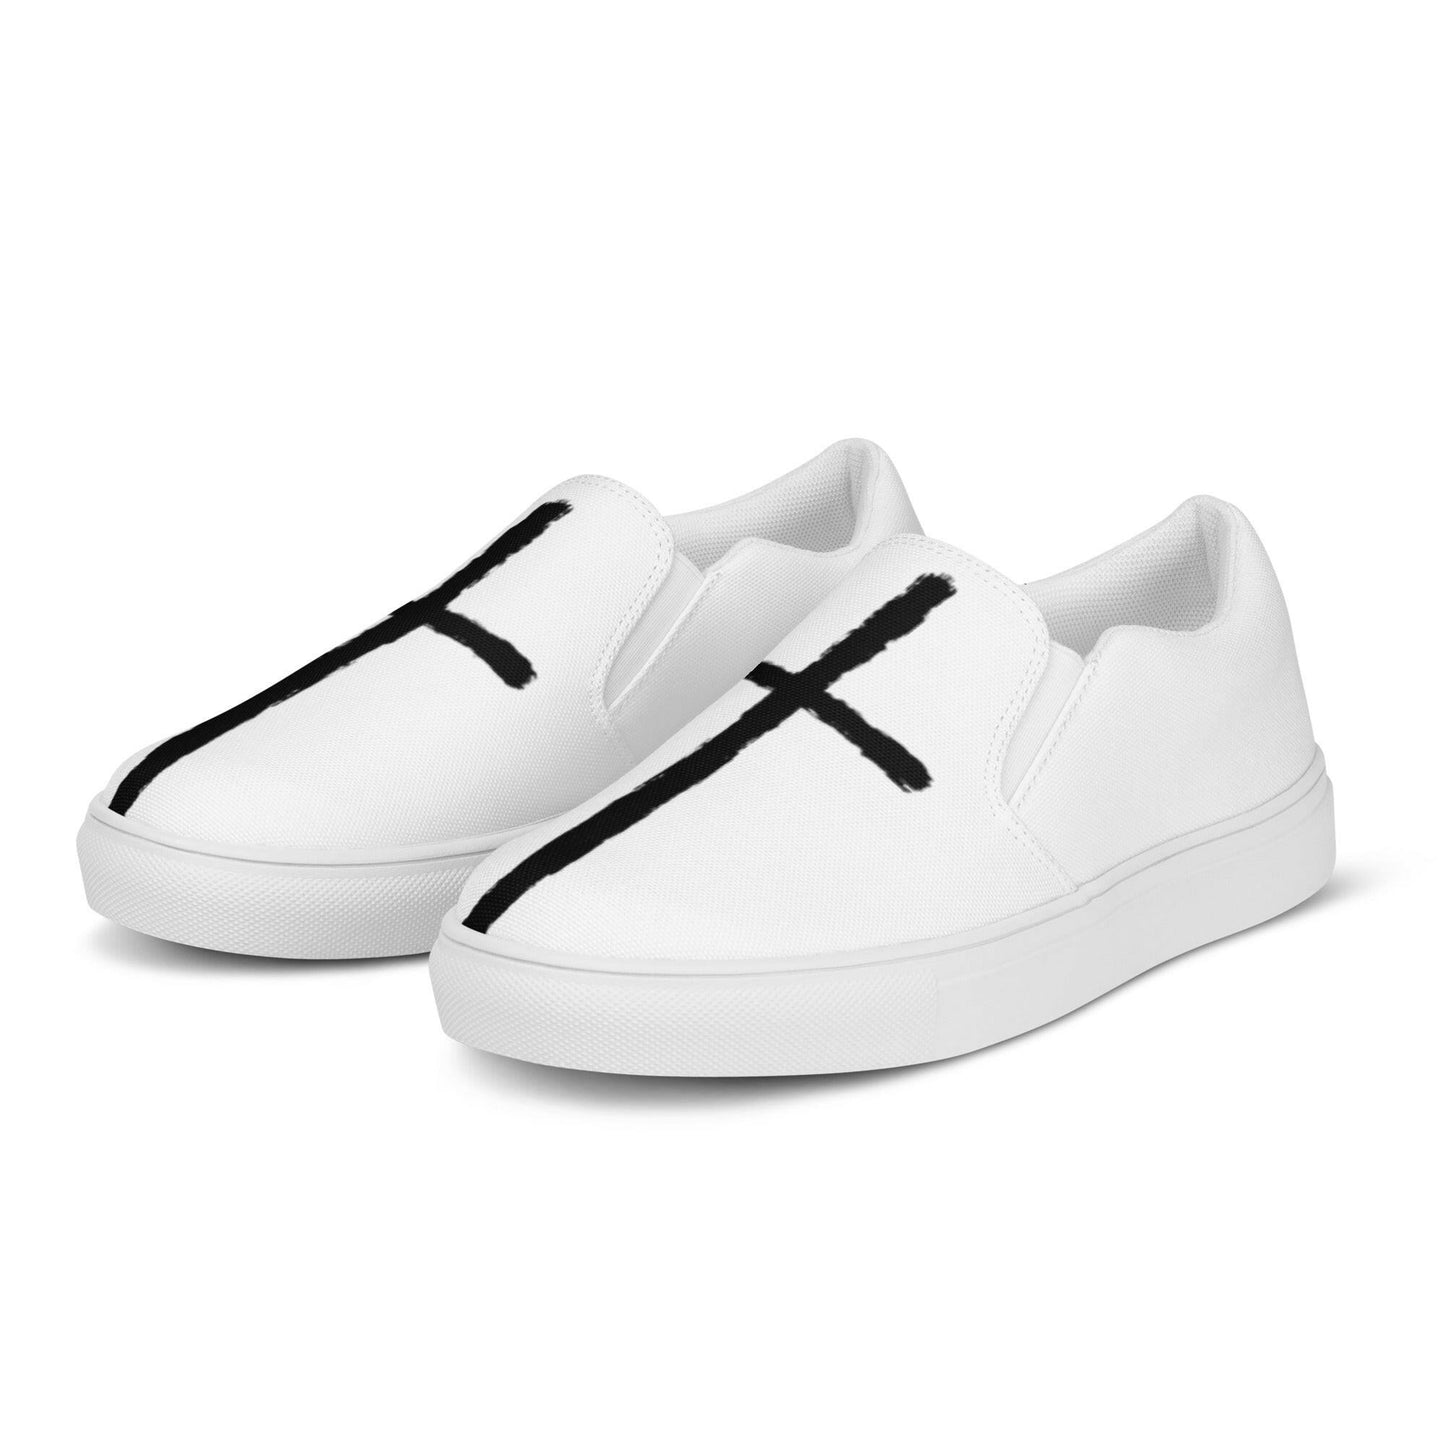 Thin Women’s Slip-on Shoes - Almighty Apparel 